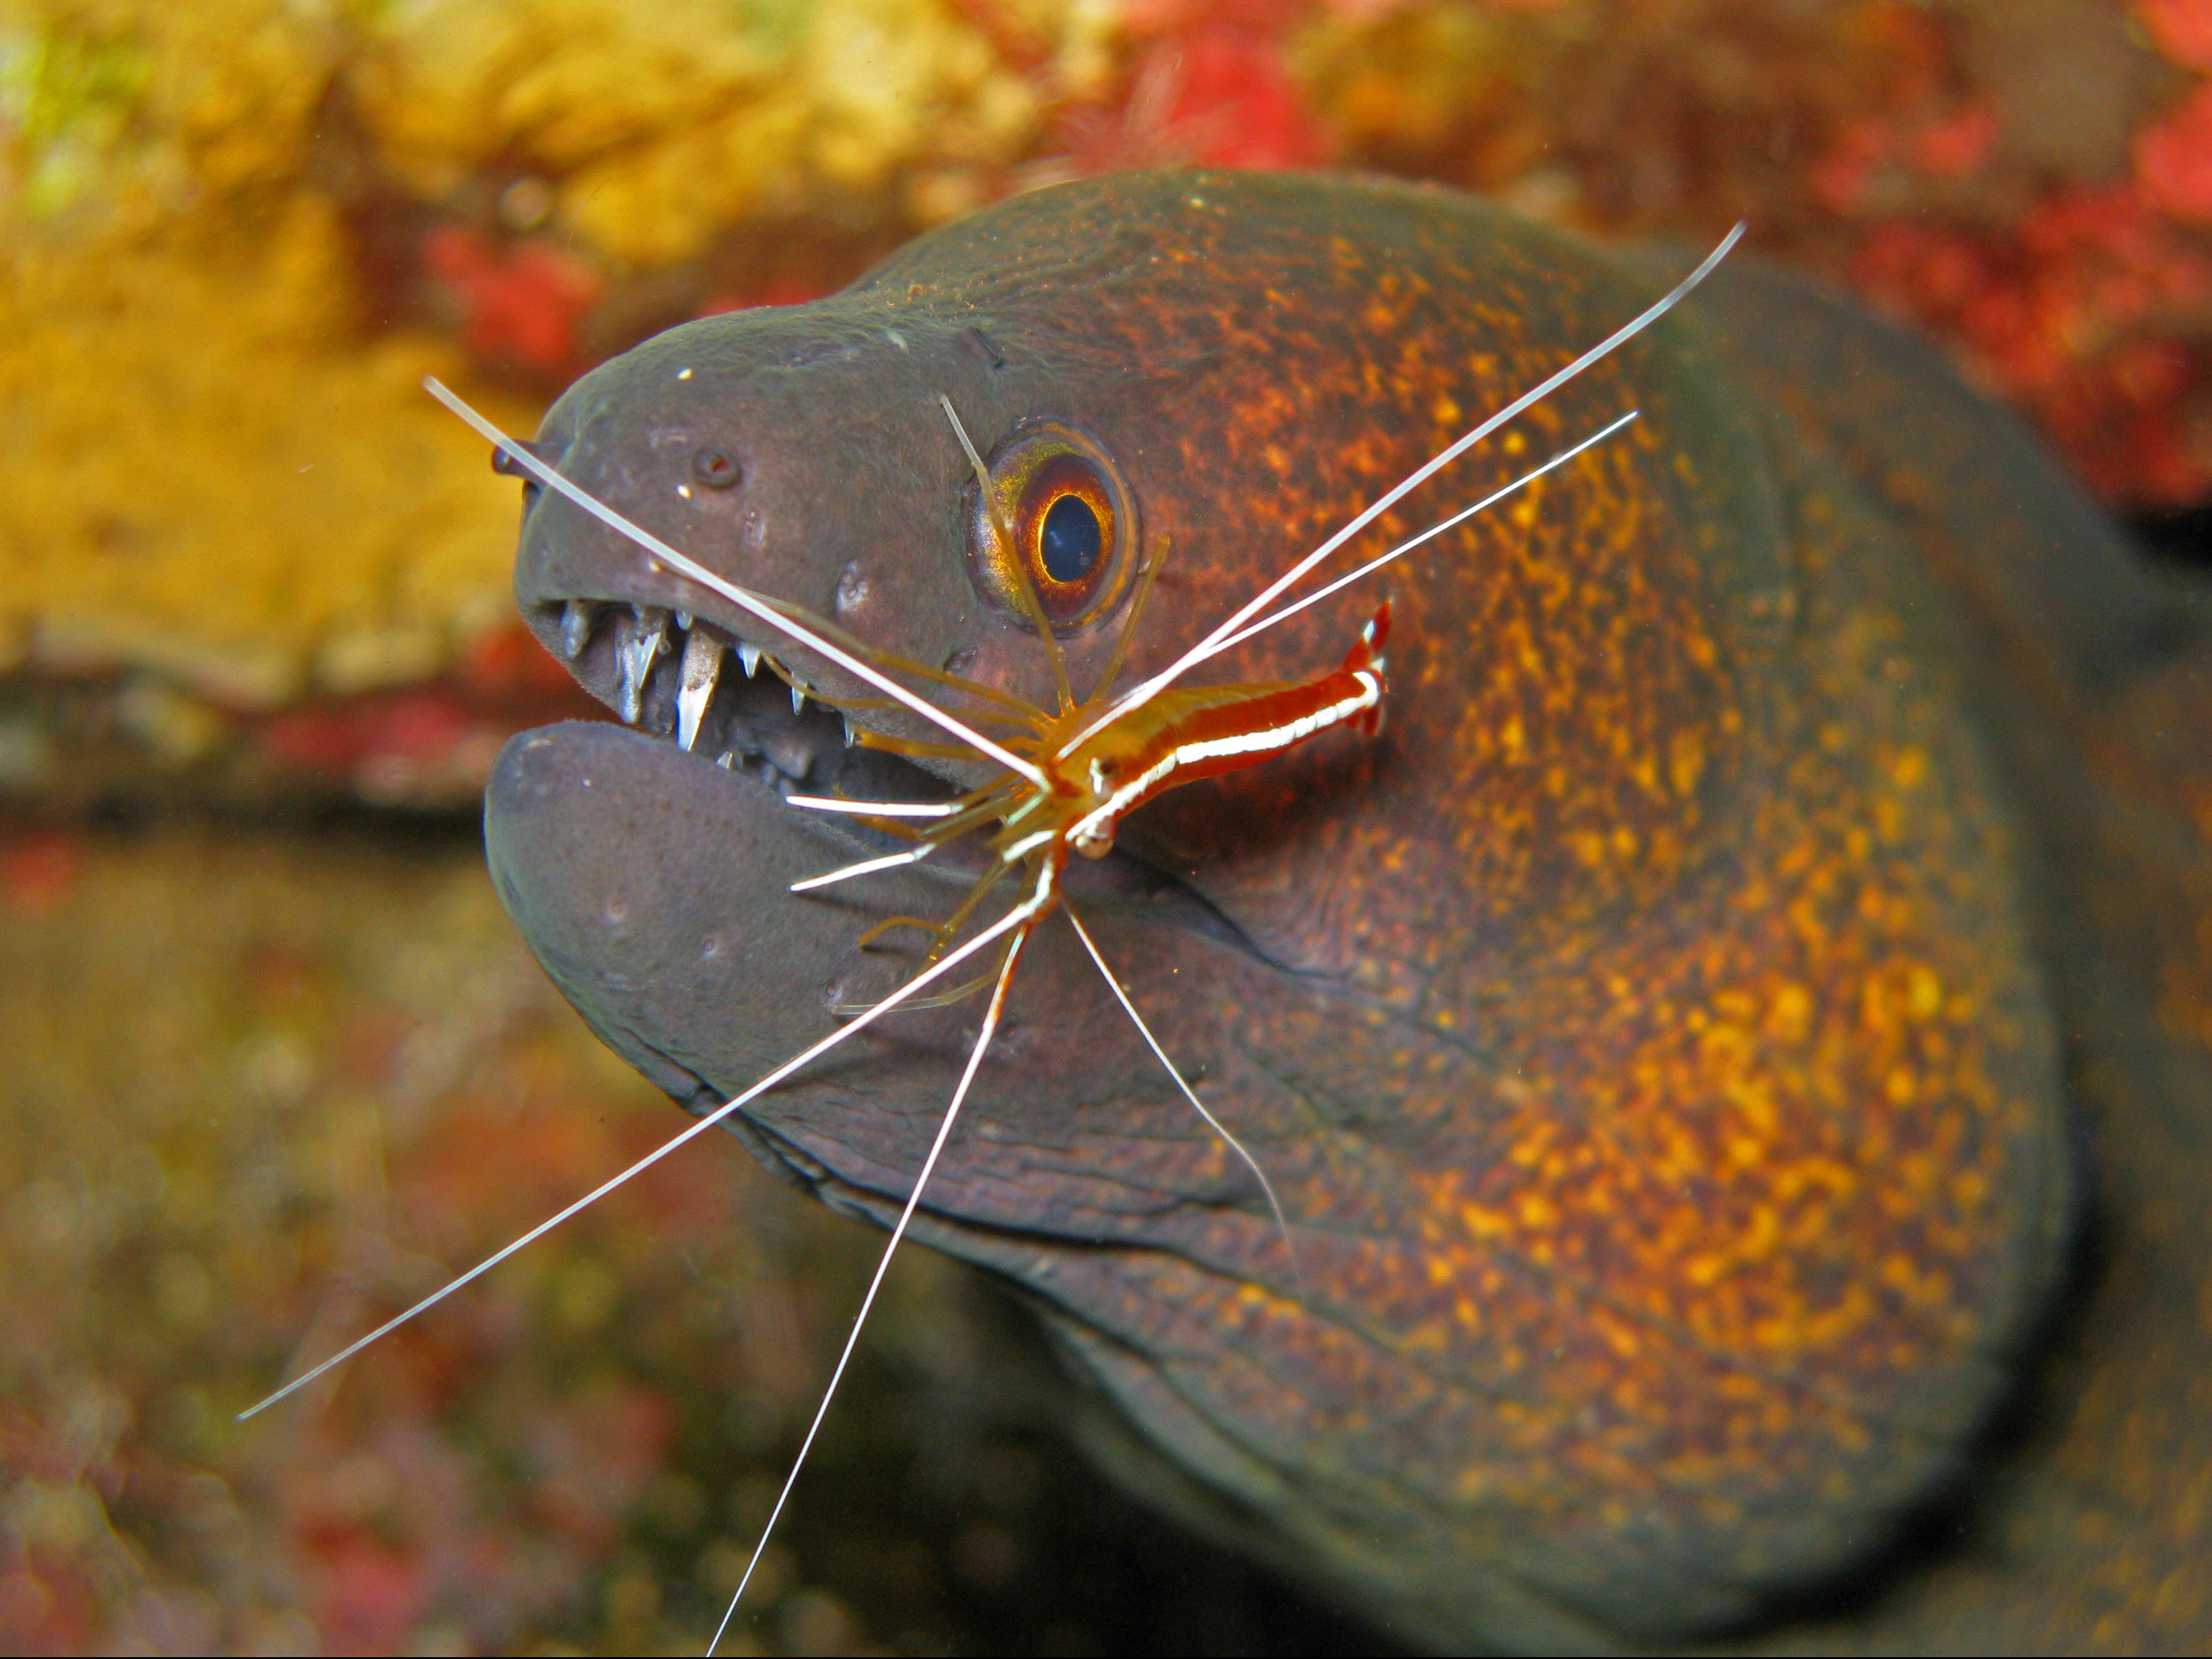 Cleaner shrimp takes on the job of cleaning a moray eel of bacteria and parasites at a cleaning station in the Caribbean Sea